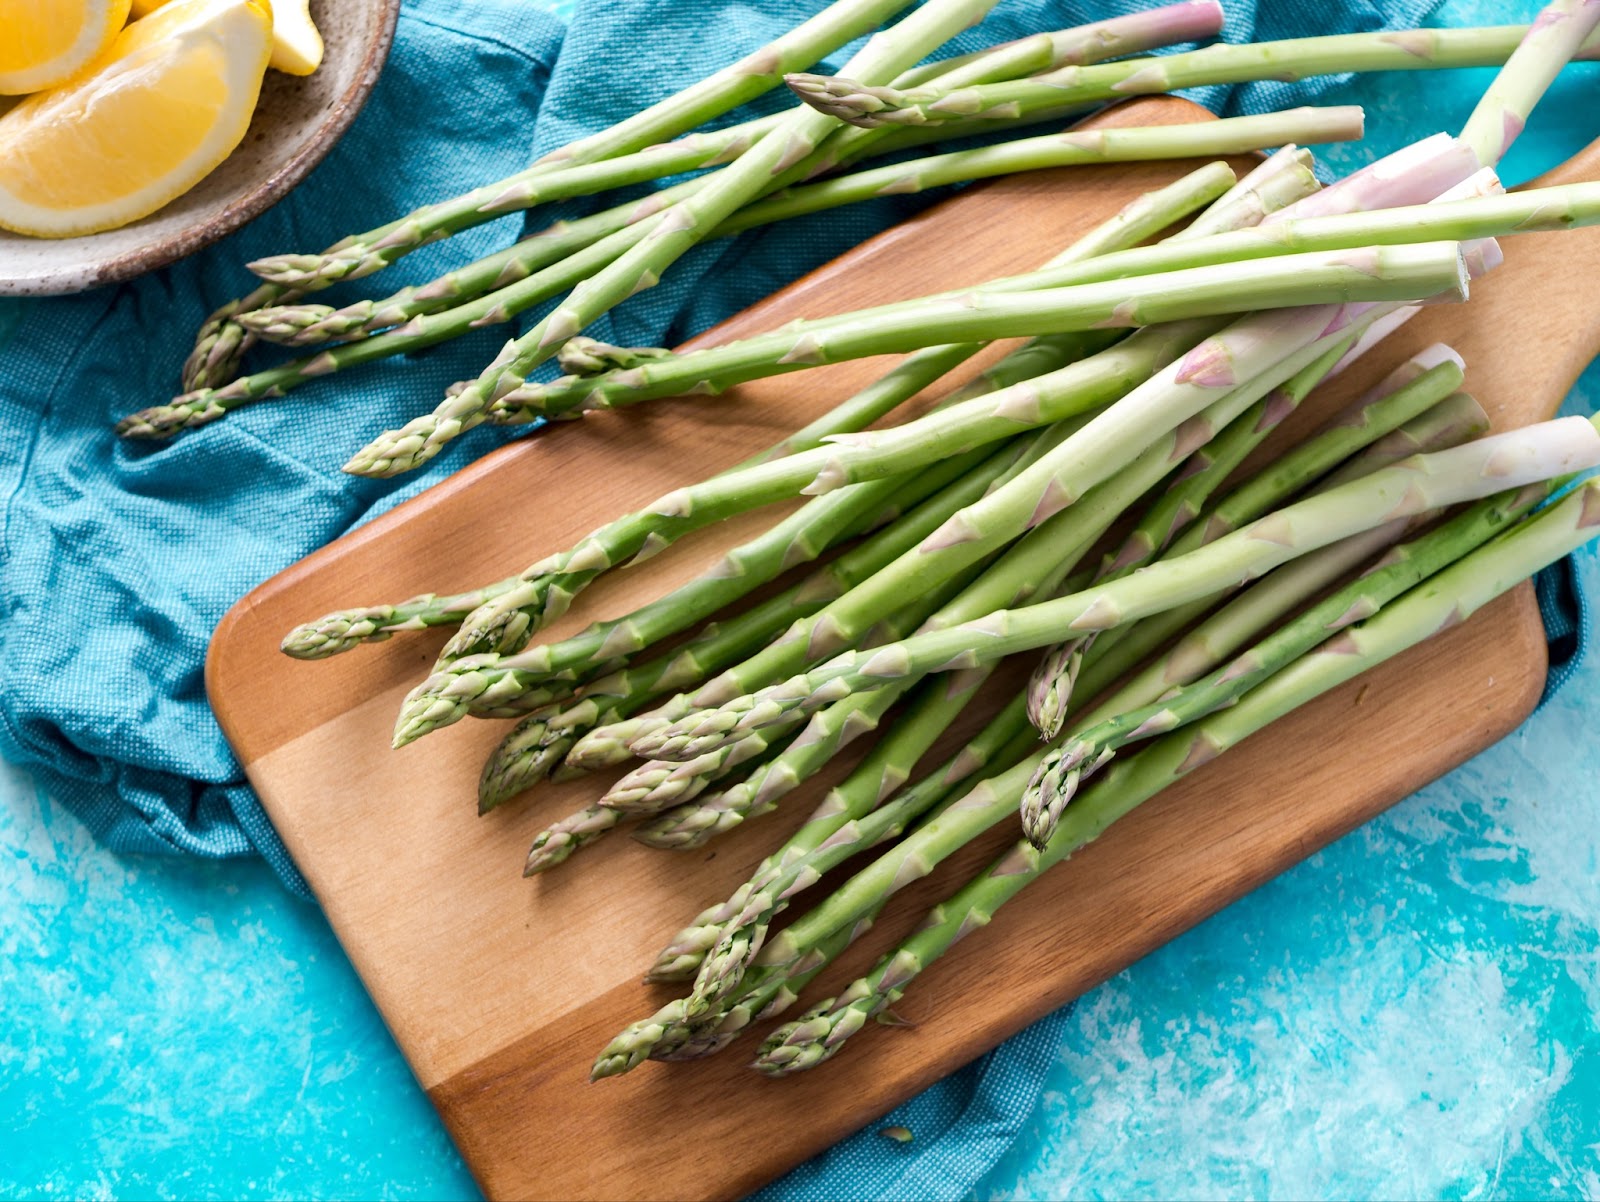 How to Tell if Asparagus is Bad - Tips & Tricks